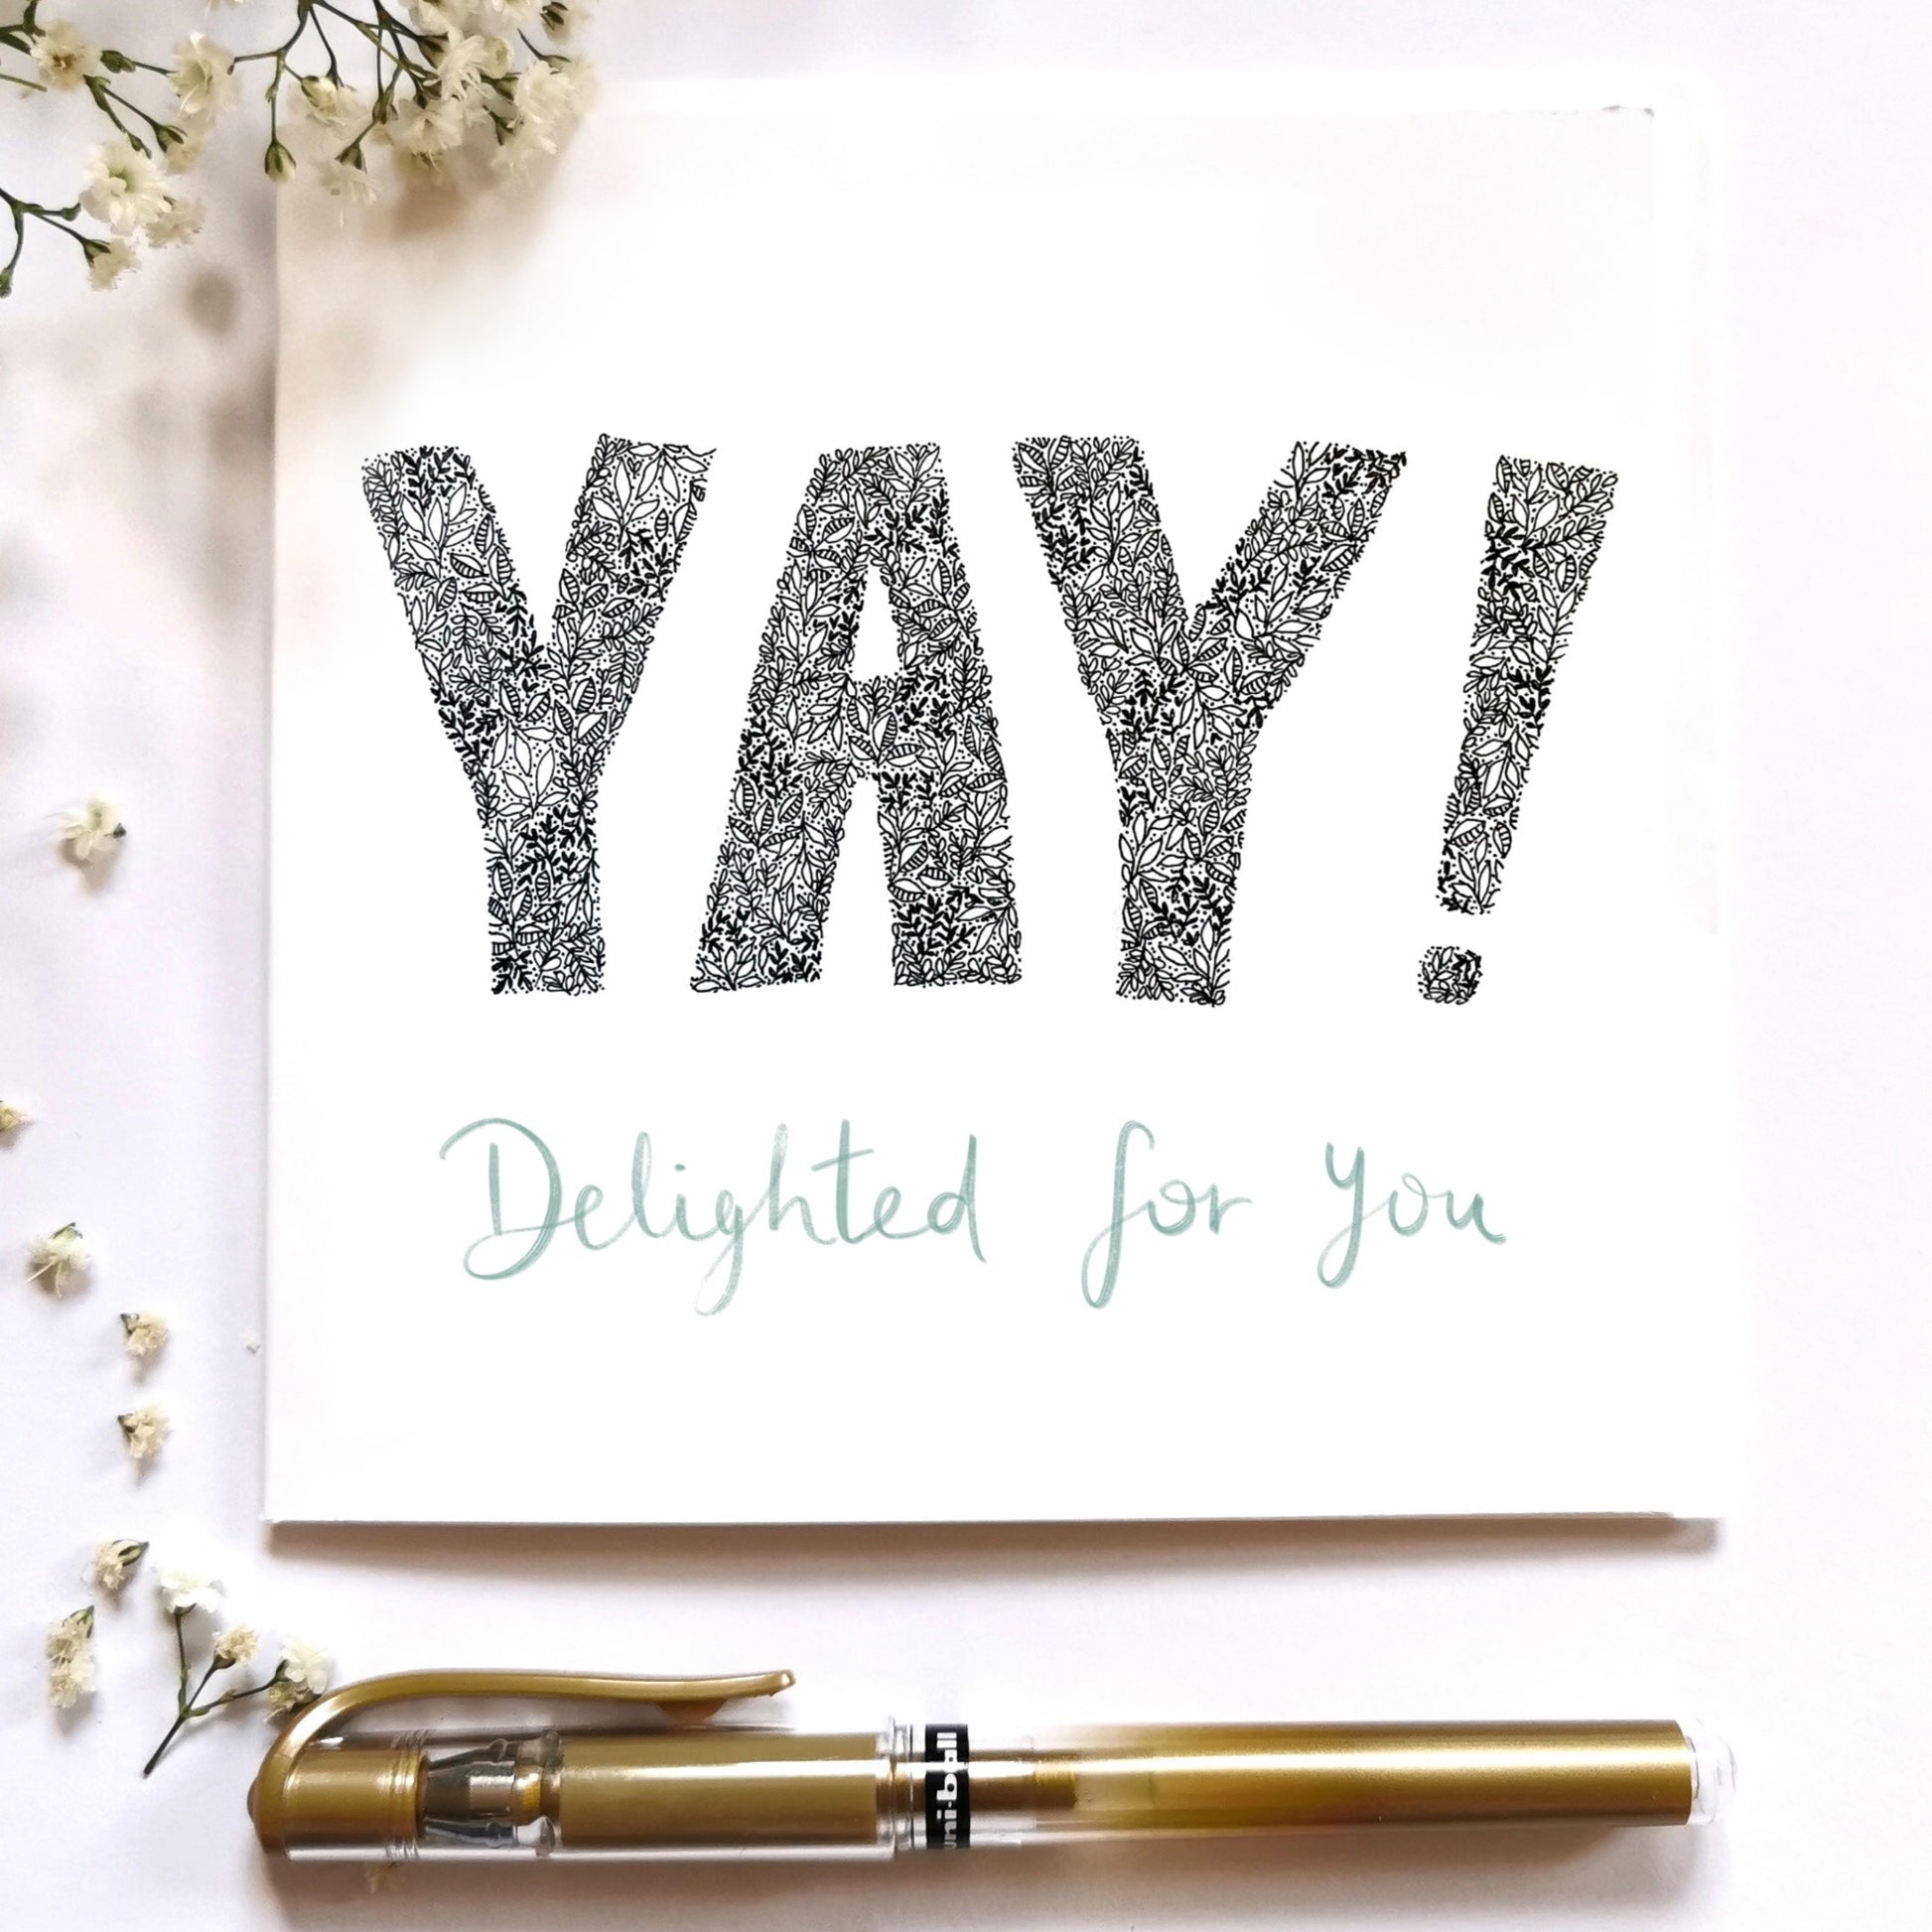 image shows YAY DELIGHTED FOR YOU illustration card. YAY is written in cap block writing drawn from flowers and leaves. and DELIGHTED FOR YOU is written in gold pen. Image is placed on a cream surface with a gold pen and white flowers. 